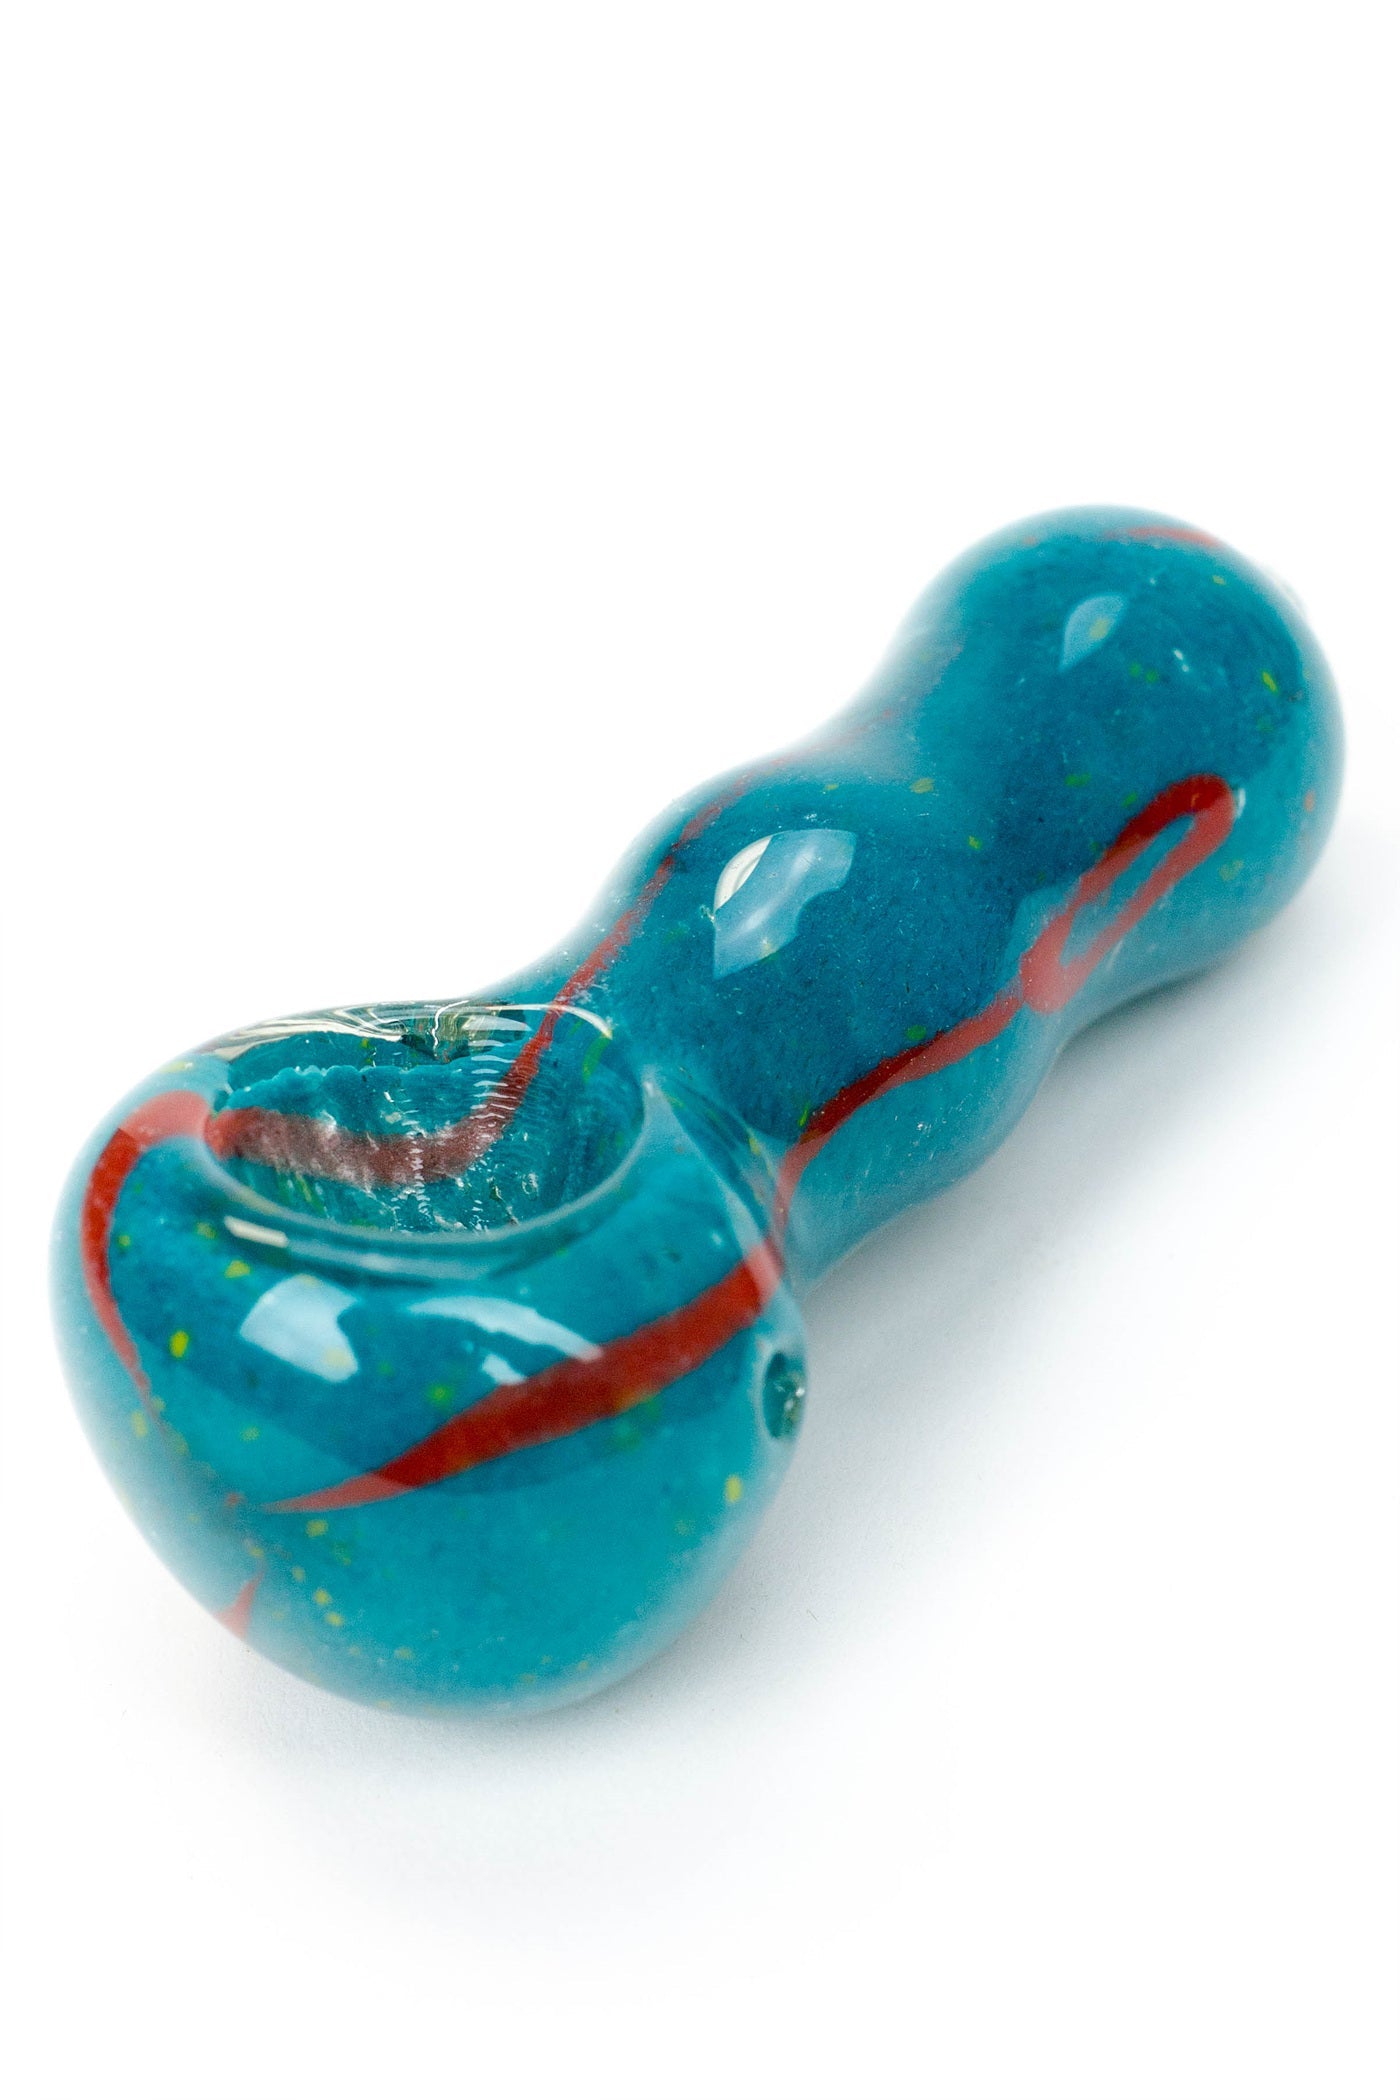 3" Soft glass 8550 hand pipe_1